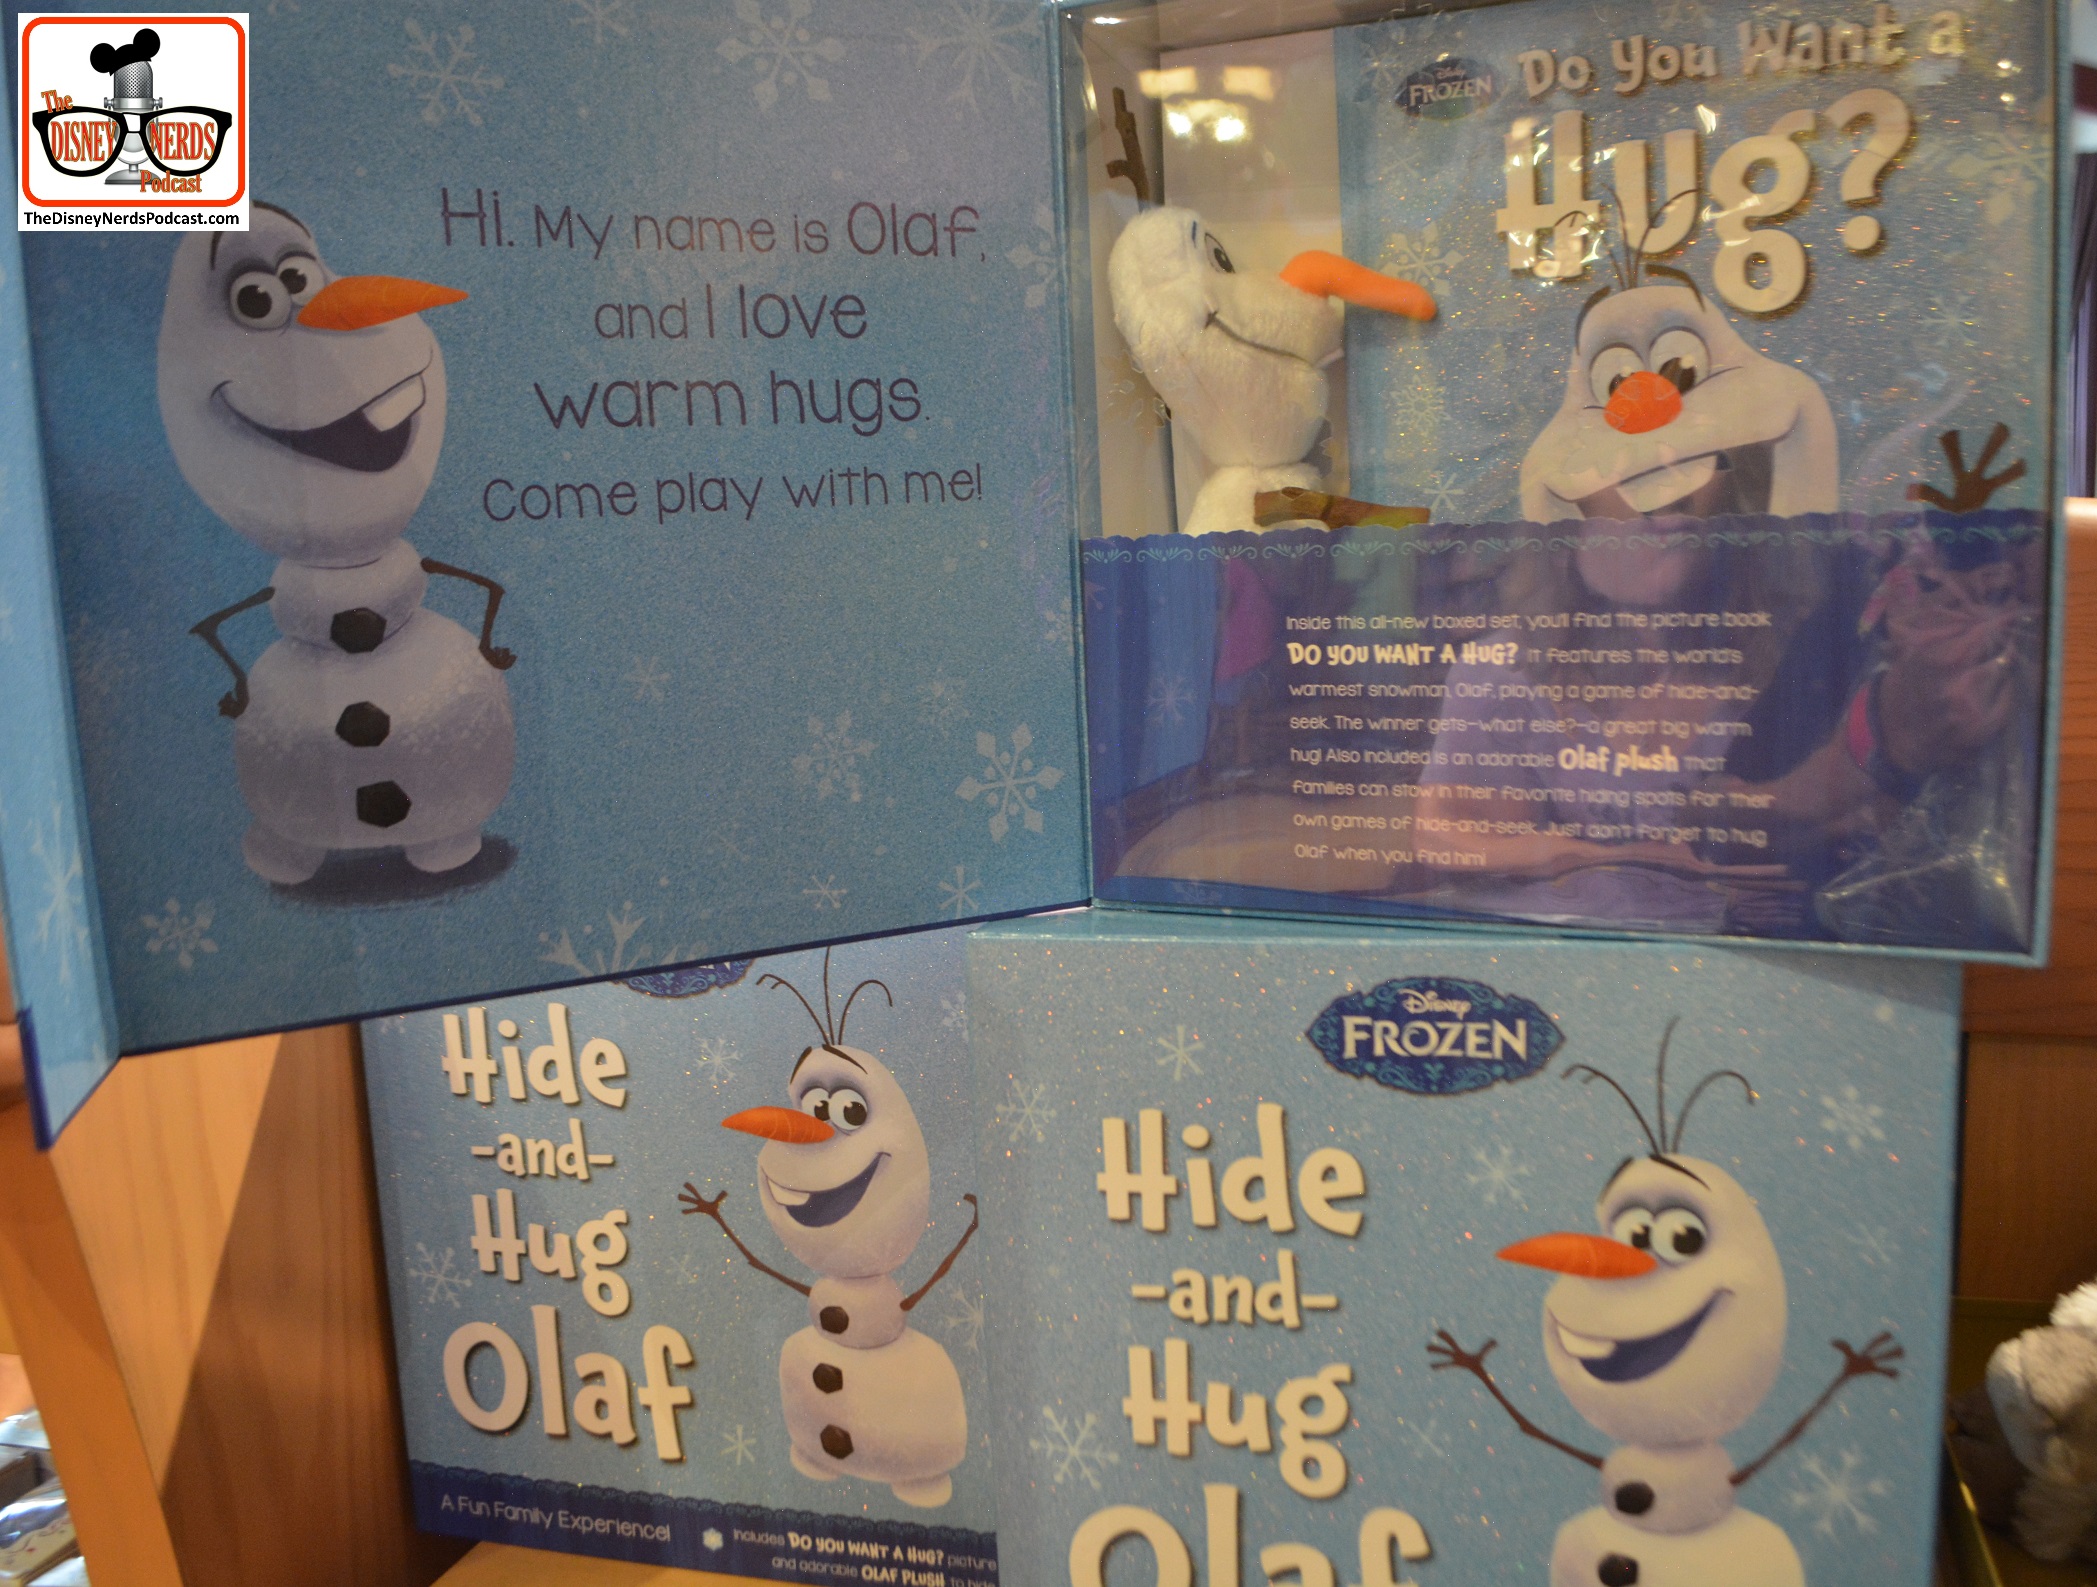 Look out "Elf on a shelf" , Hide and Hug Olaf, is looking to take your job!! Located in World of Disney